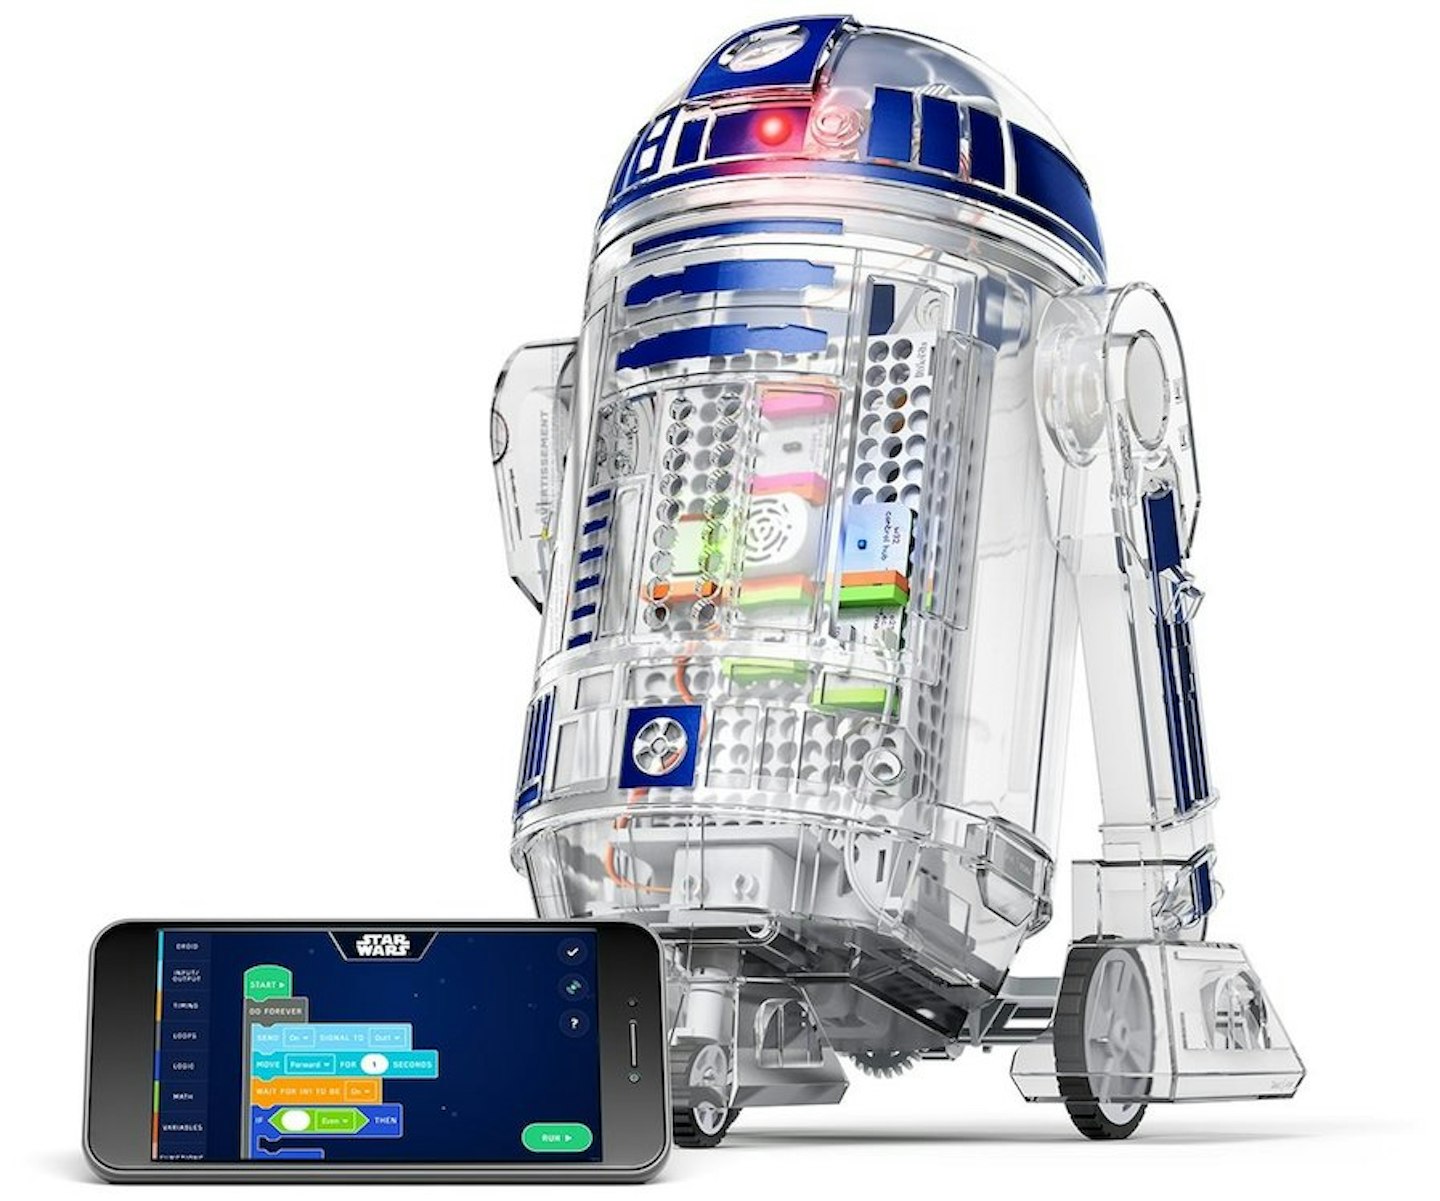 This R2-D2 Coffee Press Is Perfect